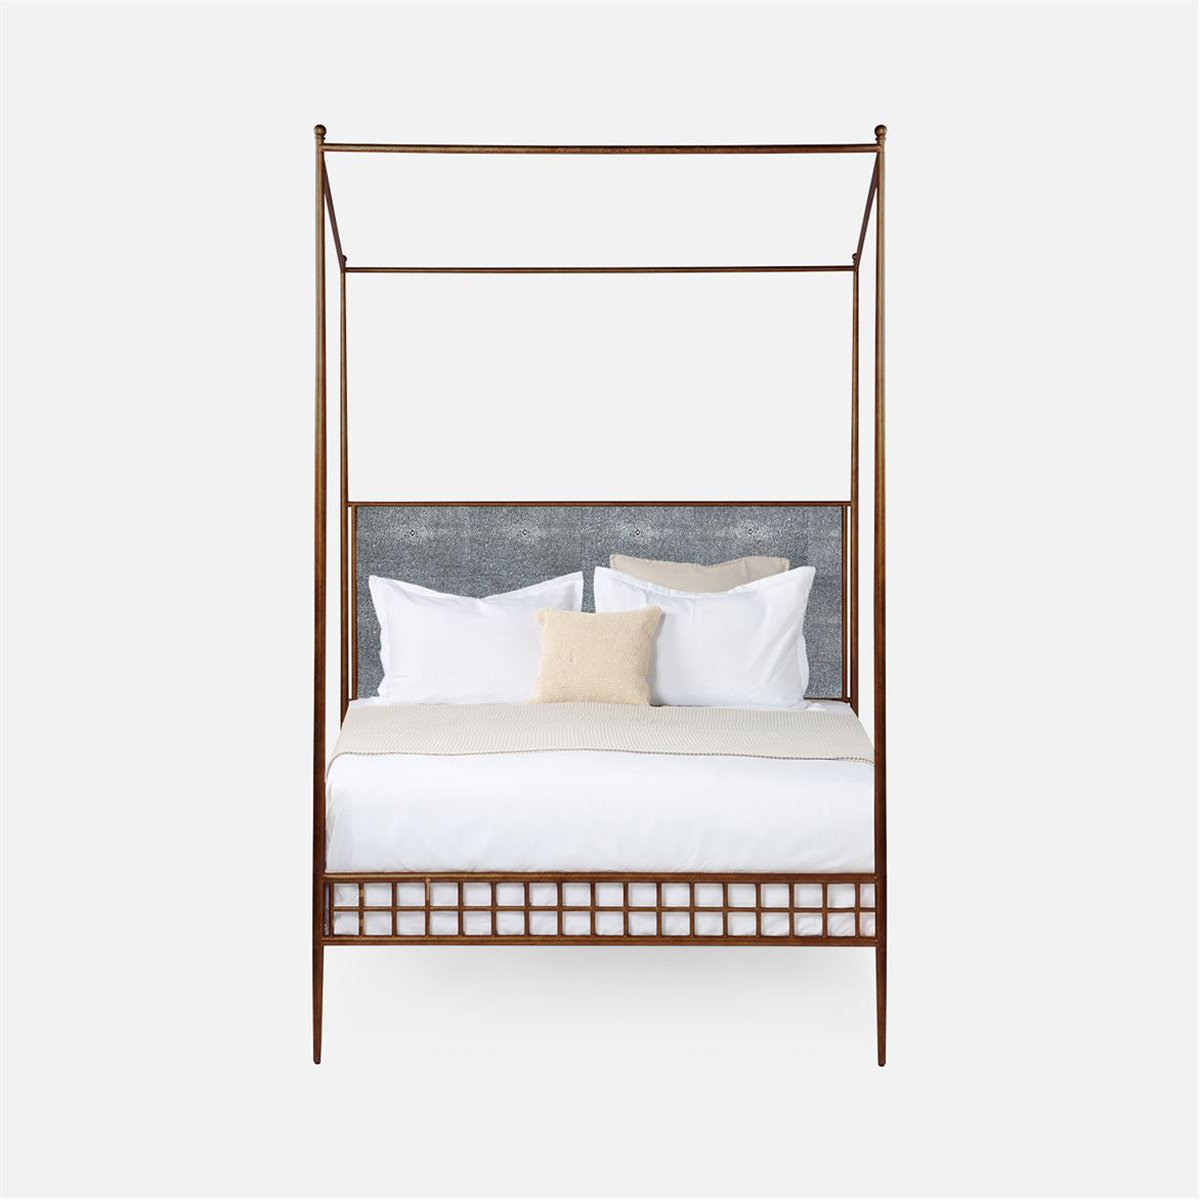 Made Goods Hamilton Textured Iron Canopy Bed in Garonne Leather